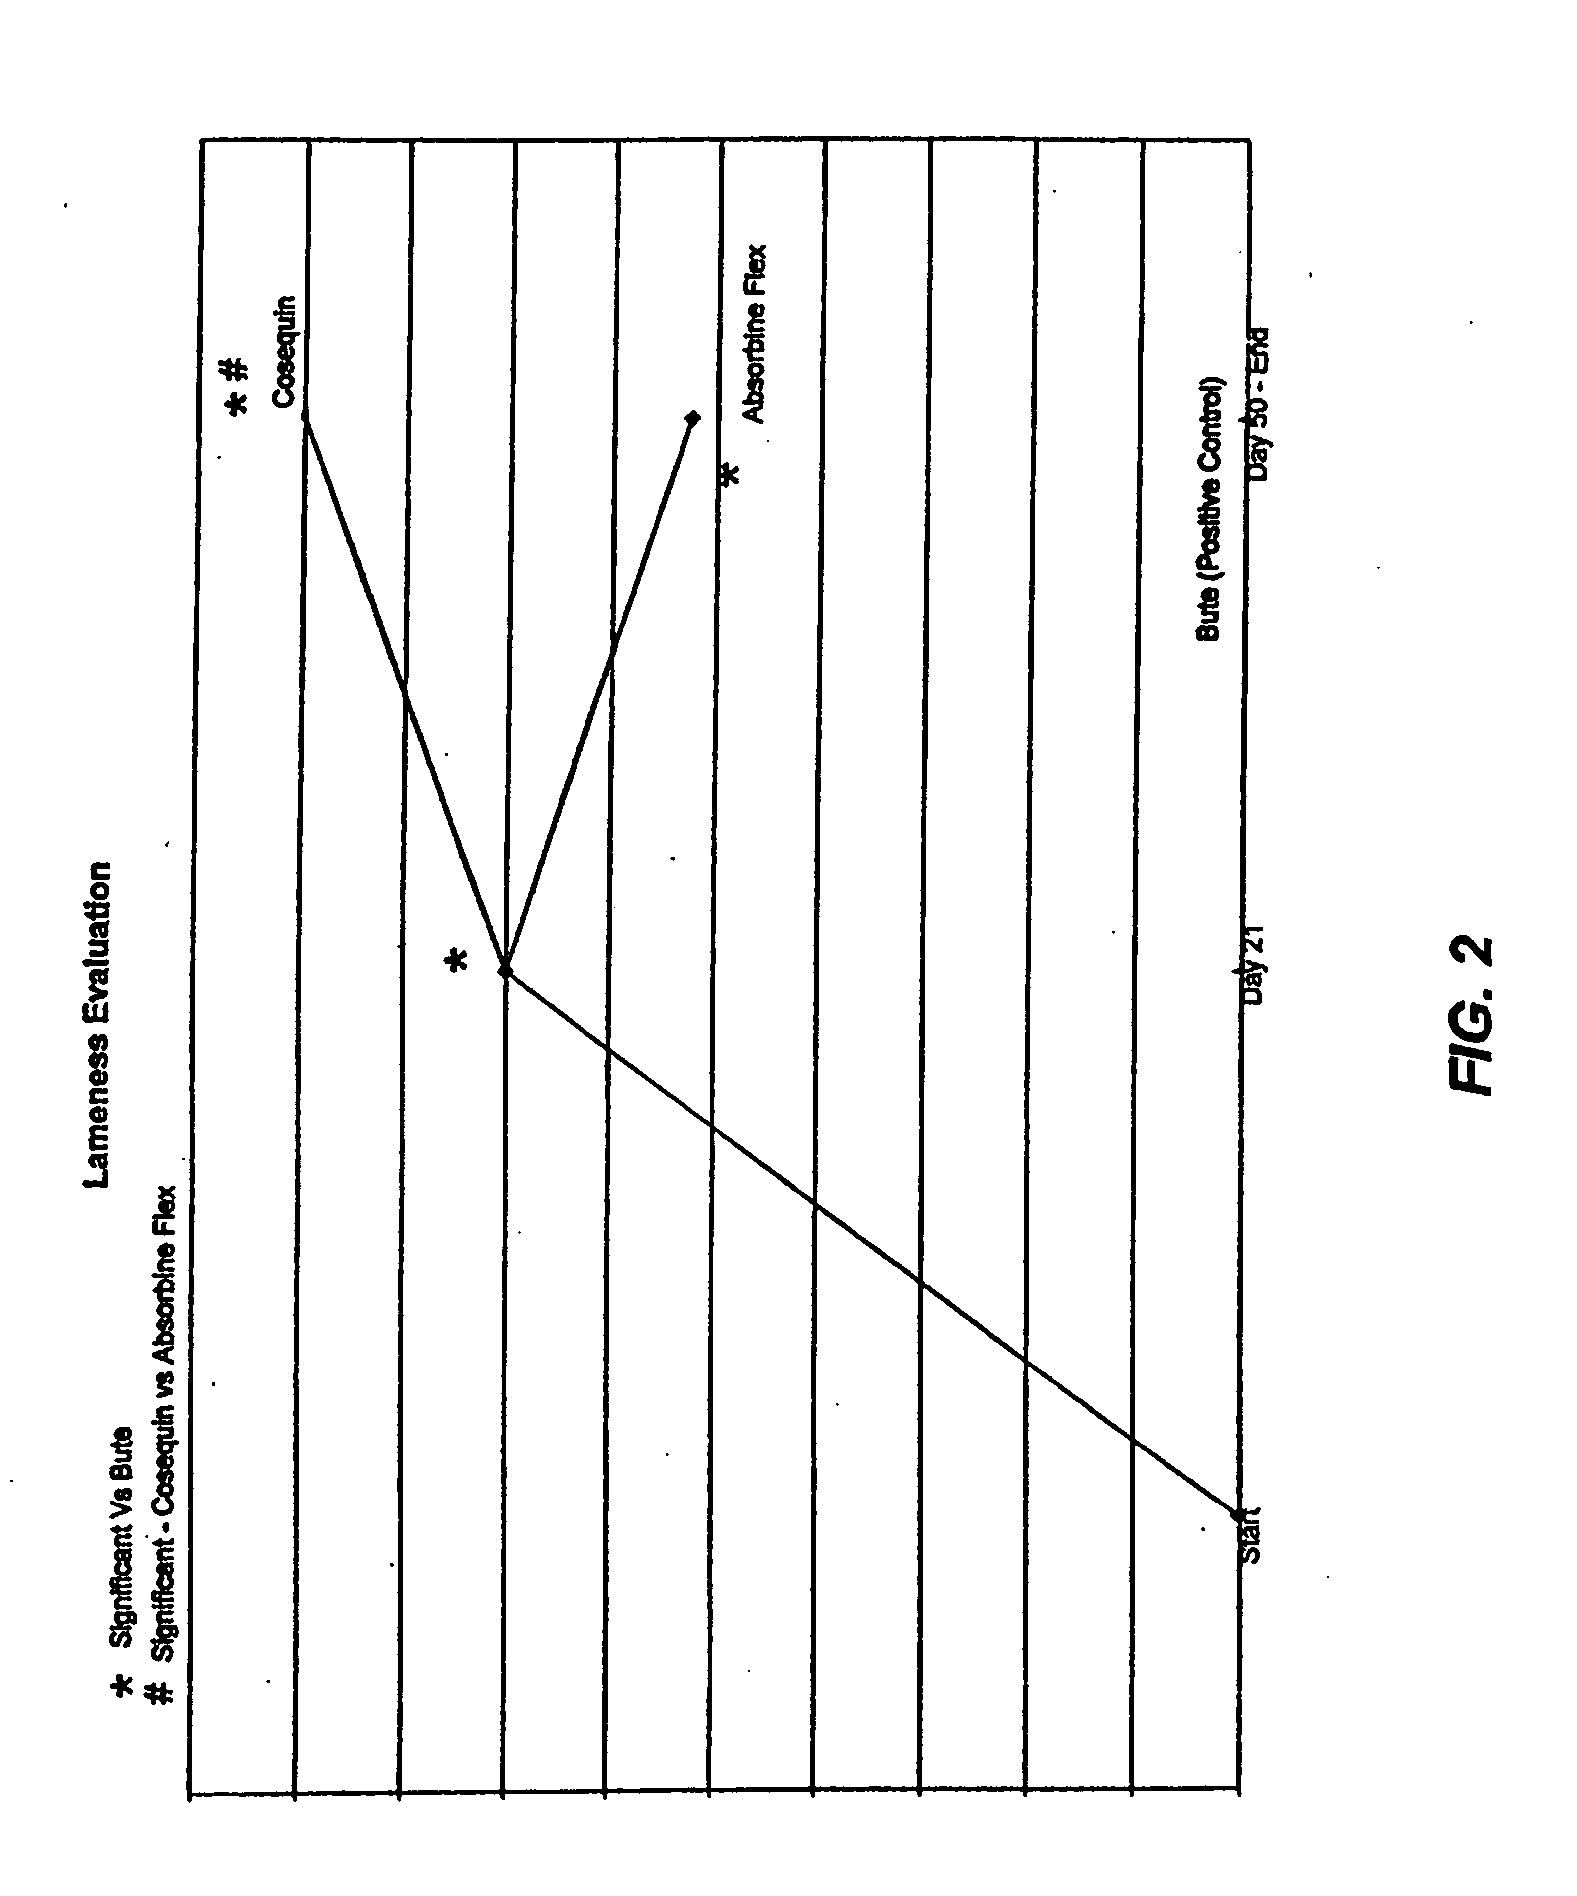 Methods for treating joint inflammation